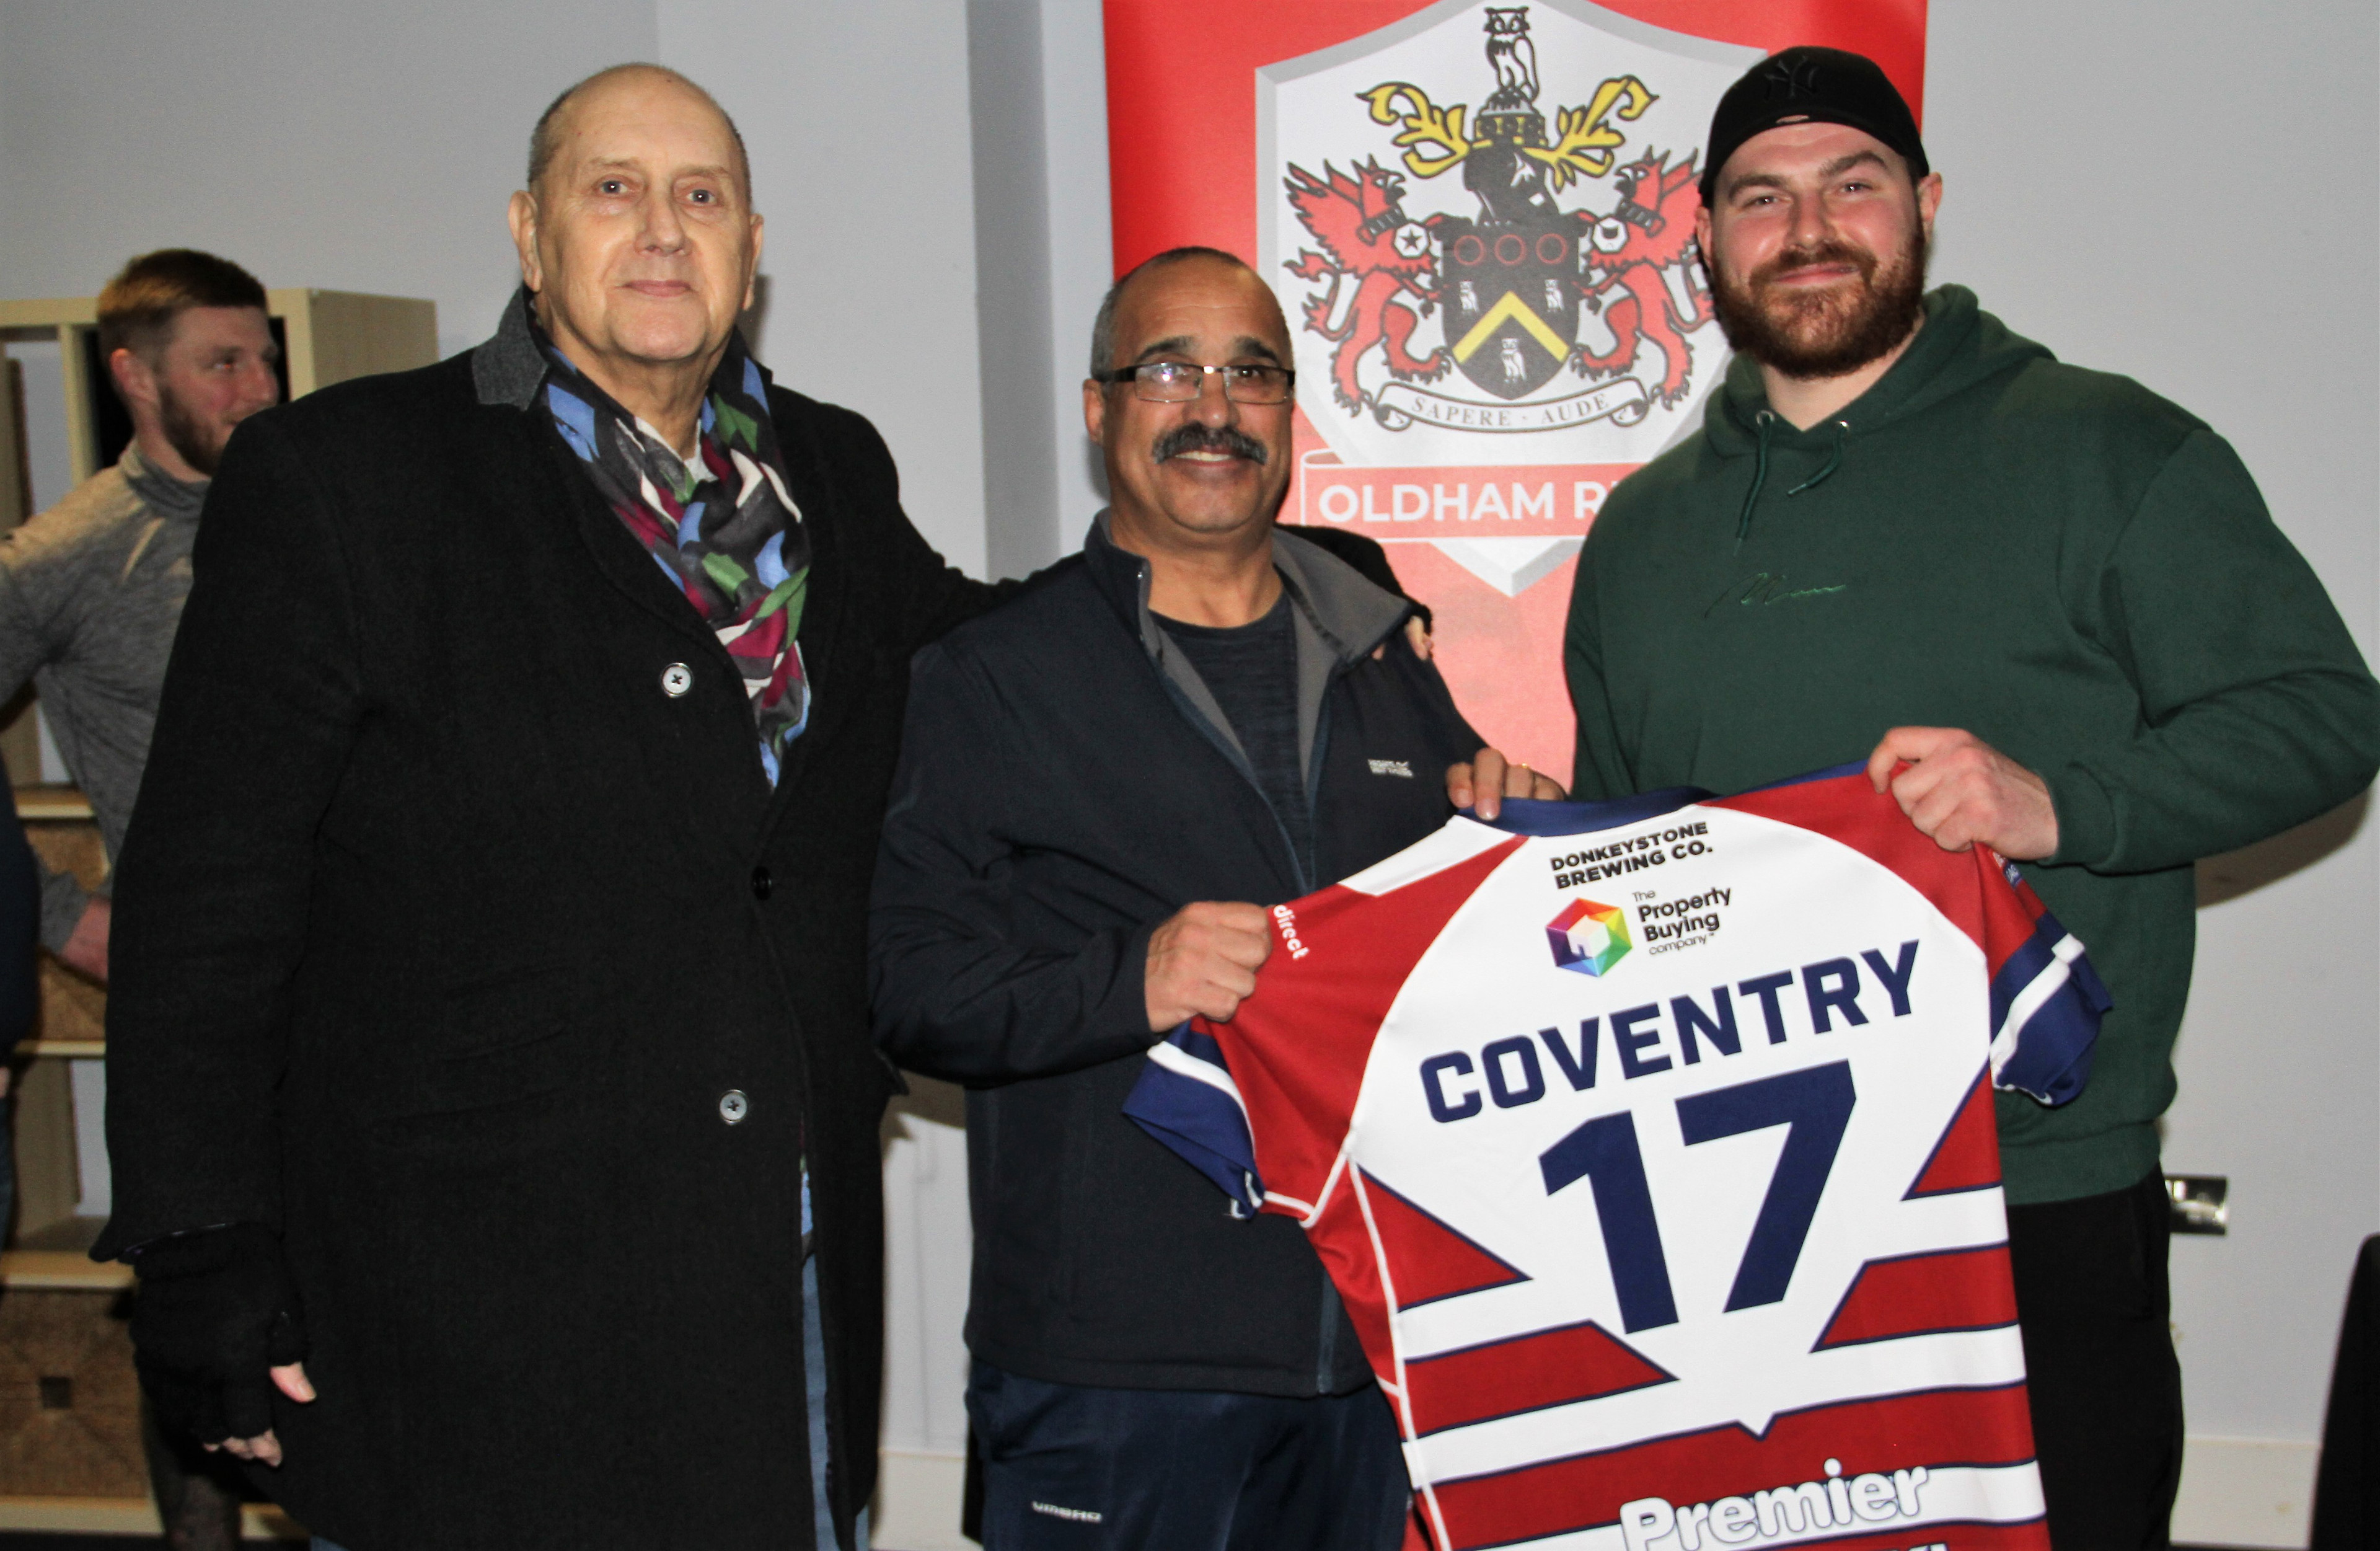 The (Past) Players&rsquo; Association have sponsored prop Jack Coventry (right), seen here with two former players who donned the jersey years ago; namely Adrian Alexander (left) and Joe Warburton, the Association&rsquo;s go&ndash;ahead secretary (centre).